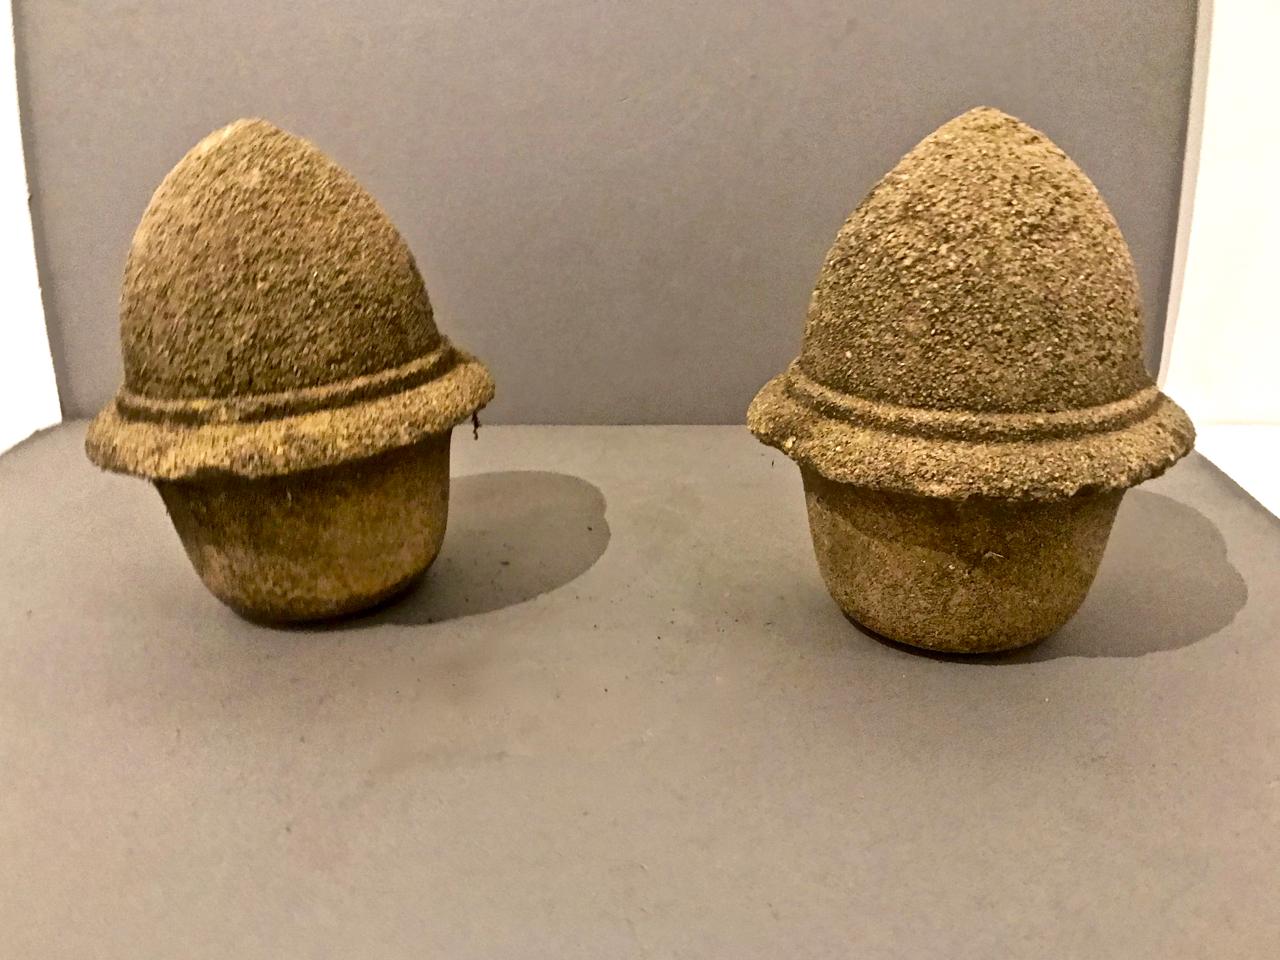 This is a very decorative pair of antique 19th century cement garden finials in the form of acorns. The degraded cement surface gives these guys lots of interest and character. They are great decorative elements inside or out.